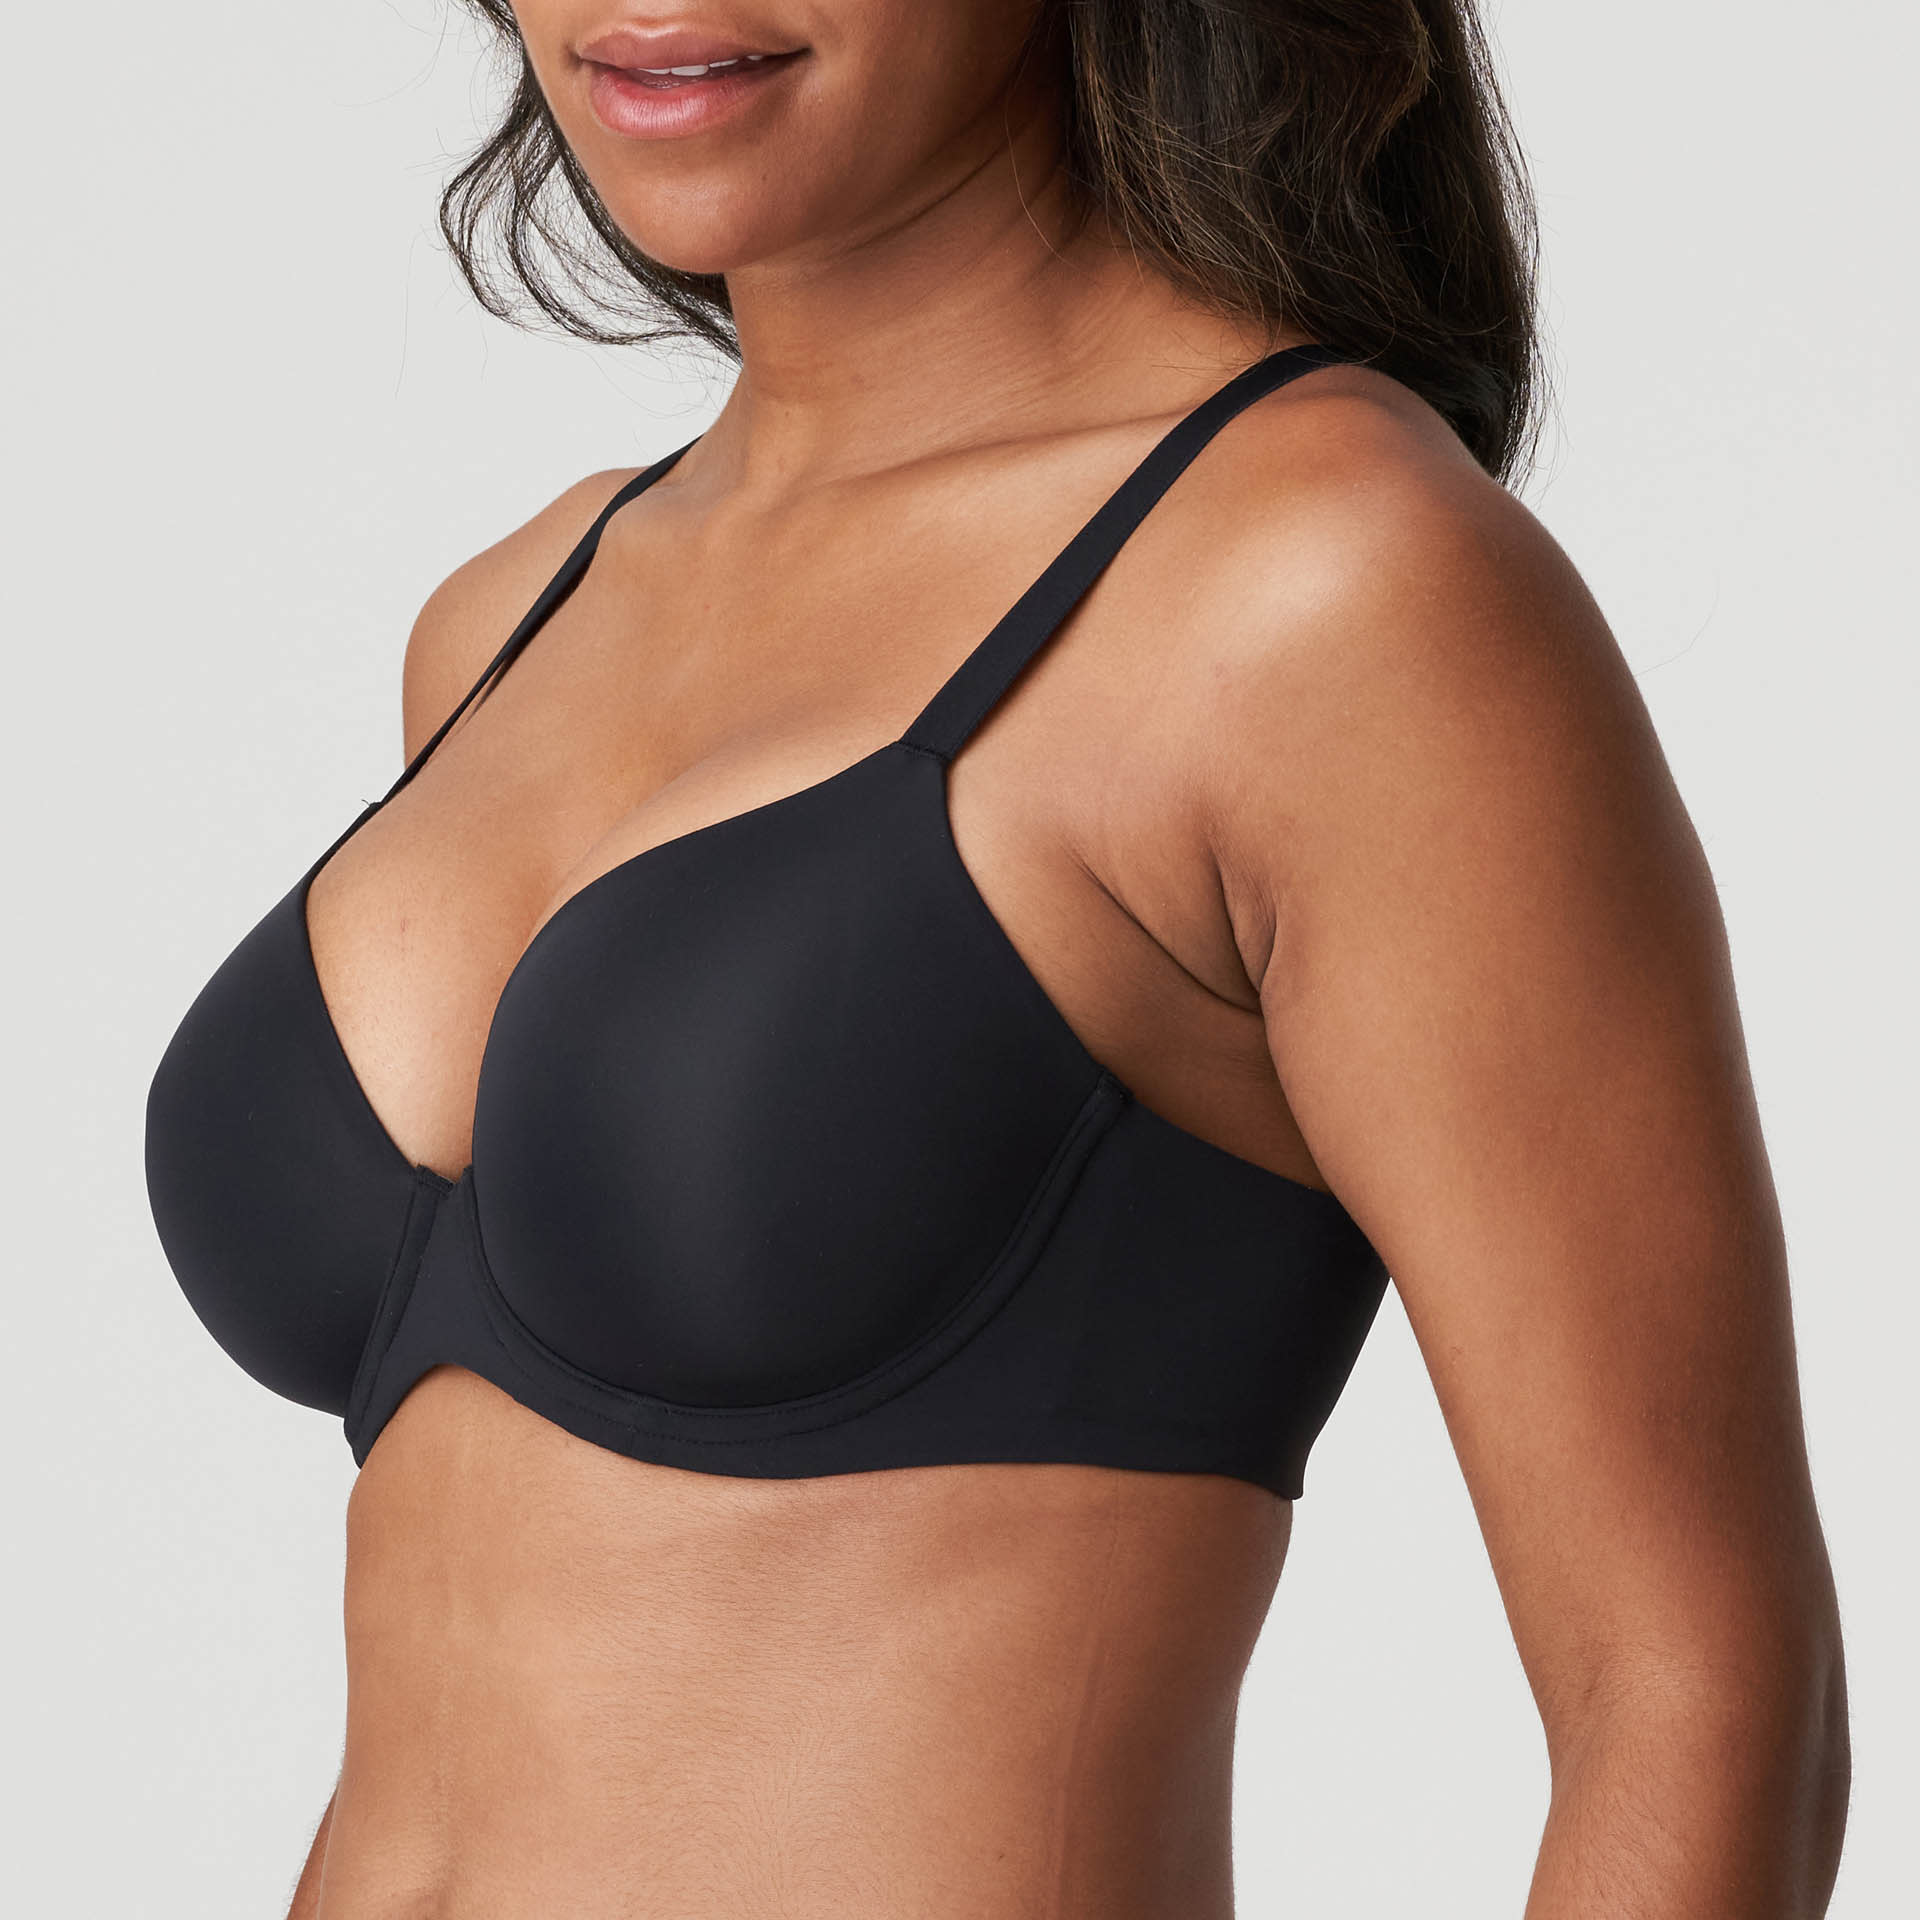  WZPIMT Valentines Women's Underwire Shaping Bra Push up Comfort  Underwire Bralettes Full Coverage Push up Bra Underwire Bra Black, Medium :  Sports & Outdoors